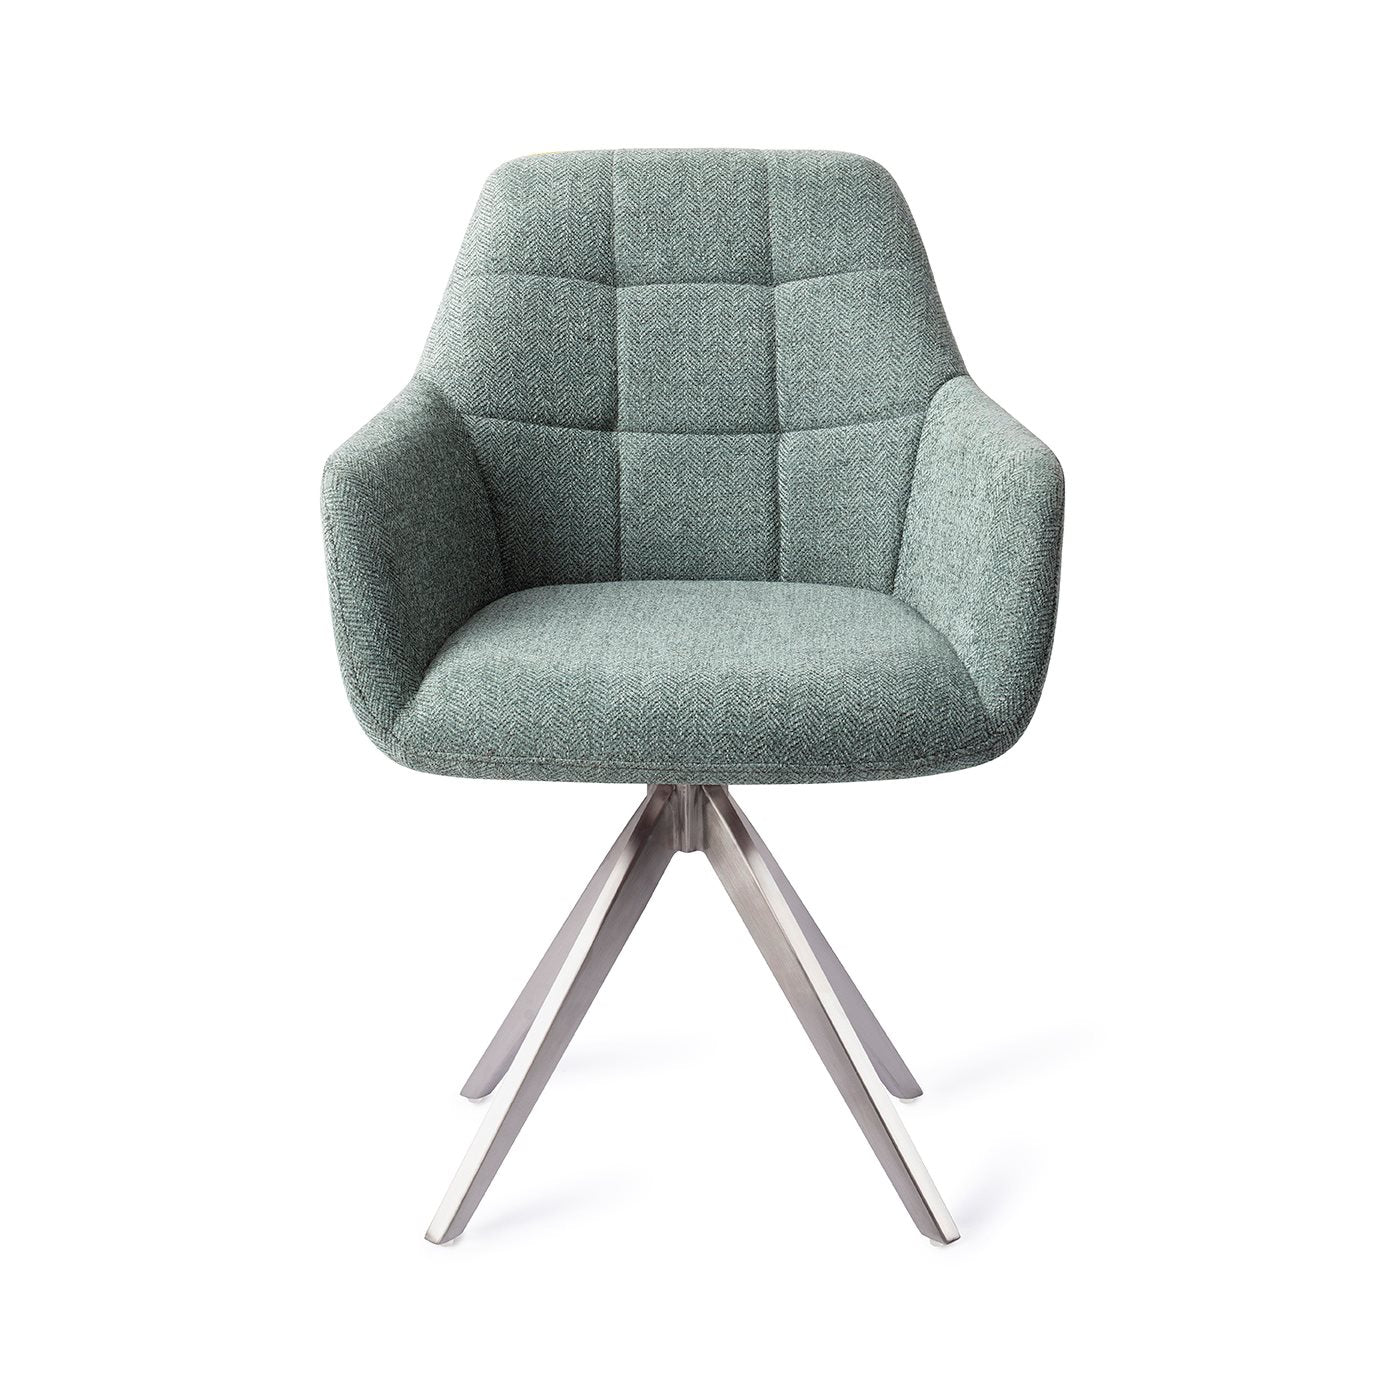 Noto Dining Chair Real Teal Turn Steel